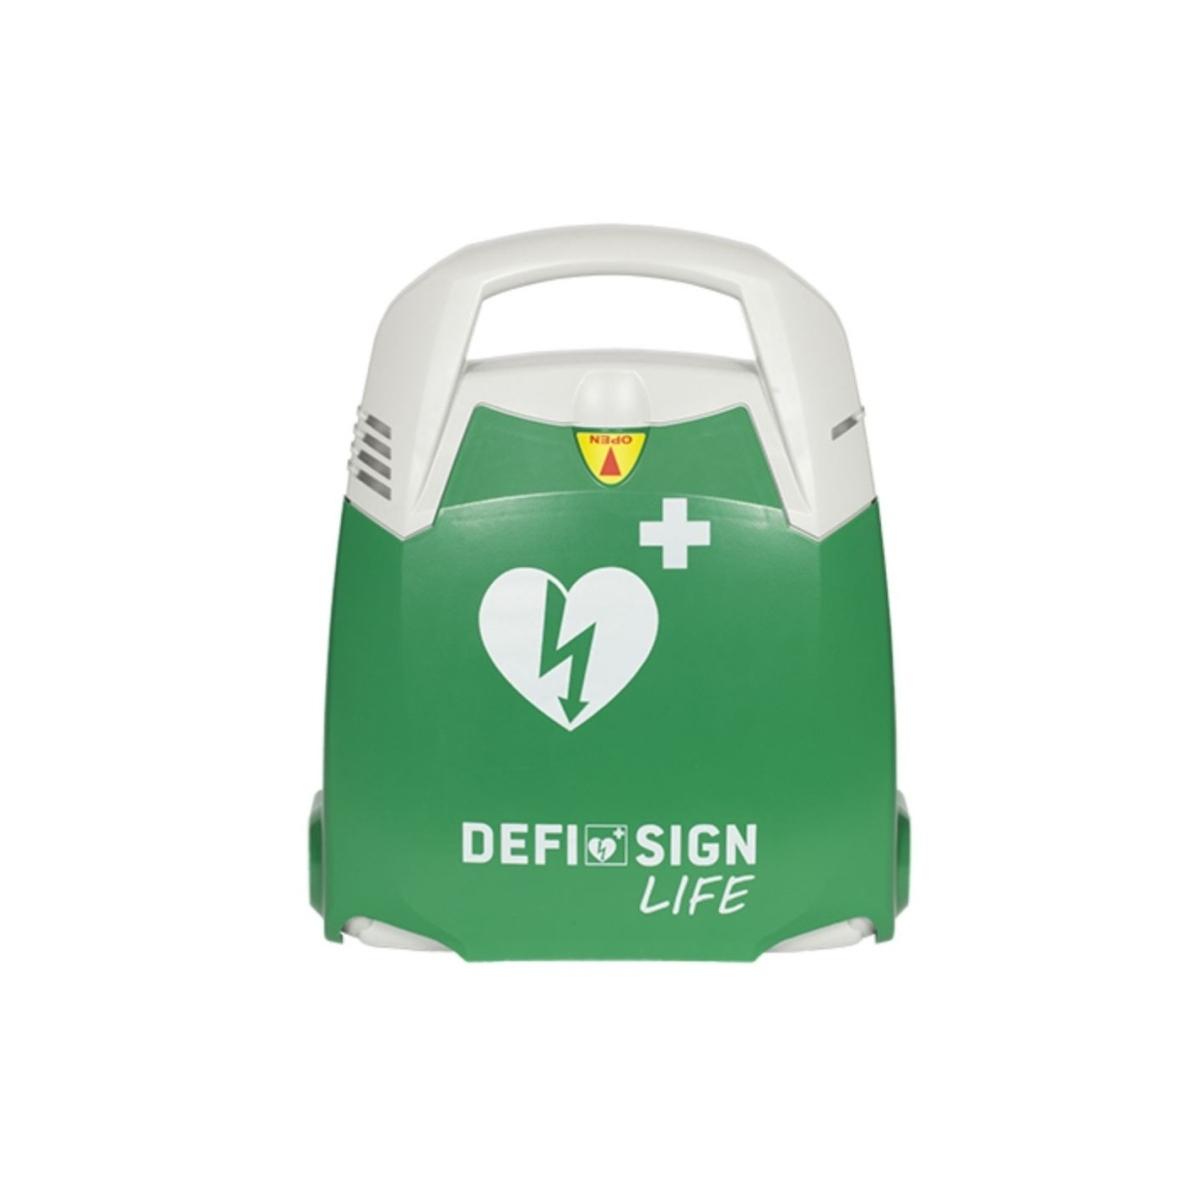 DefiSign LIFE AED - Automatico